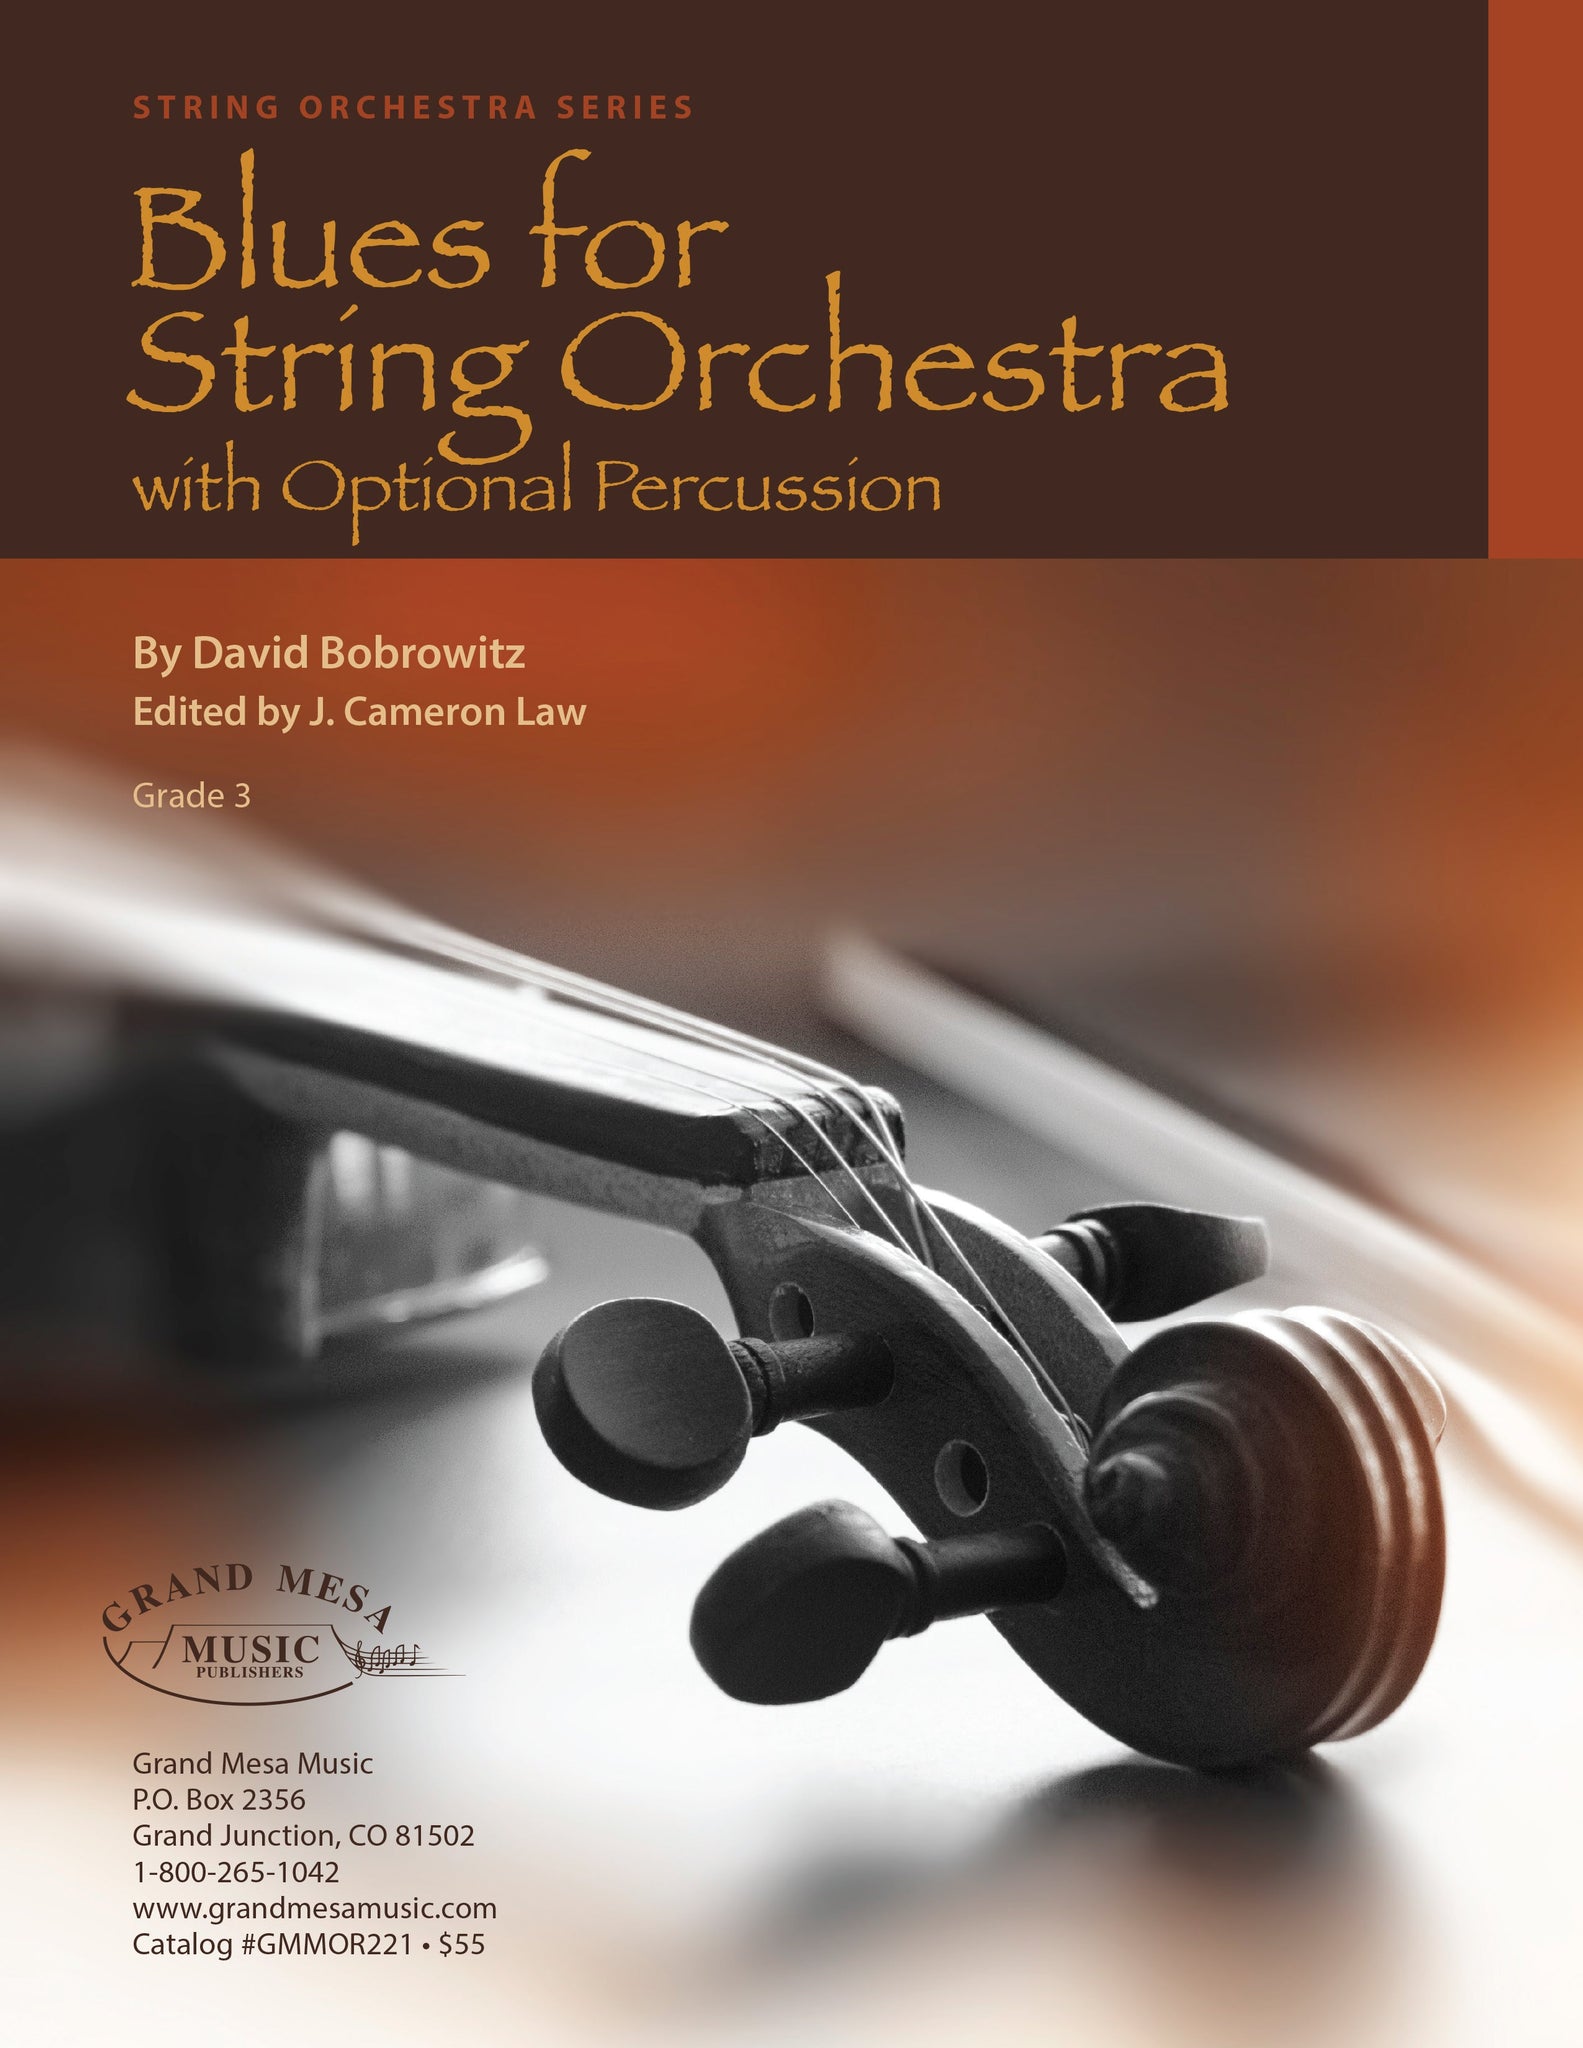 Strings sheet music cover of Blues for String Orchestra, composed by David Bobrowitz.